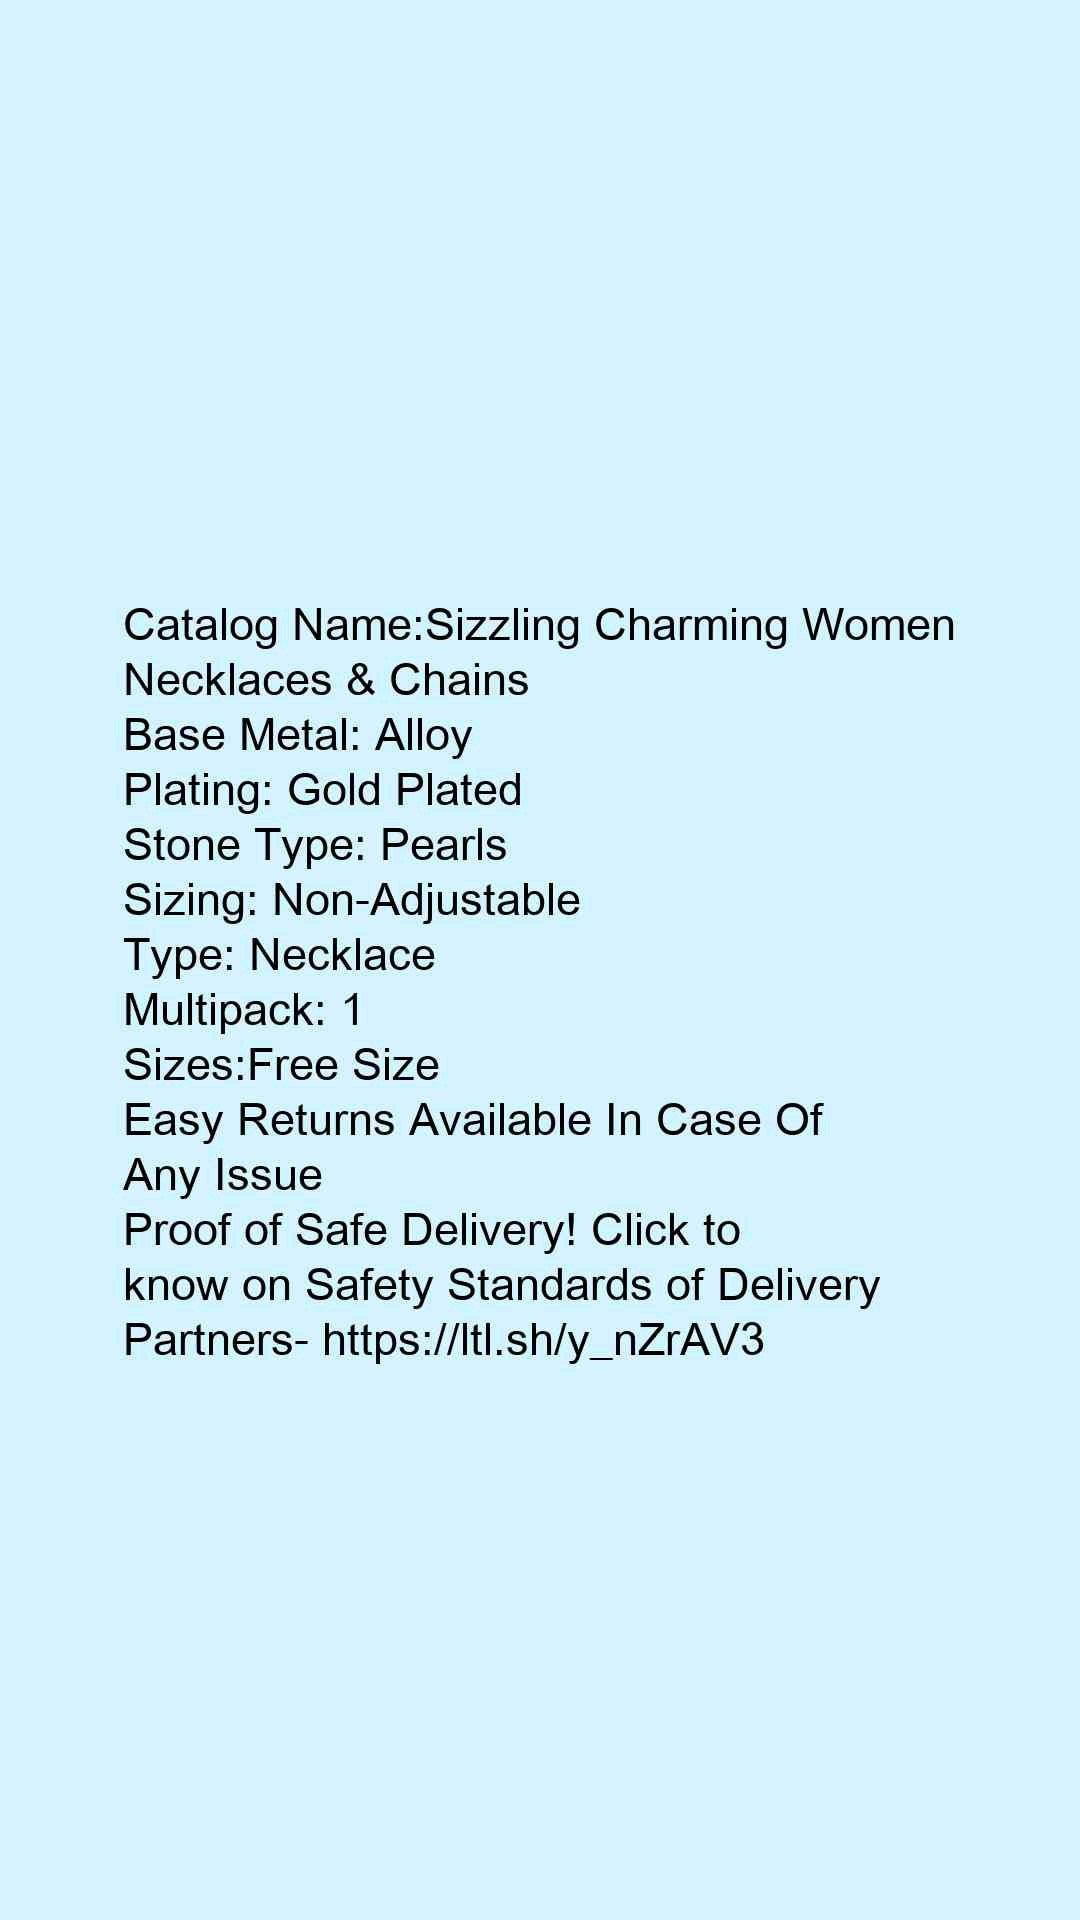 Sizzling Charming Women Necklaces & Chains